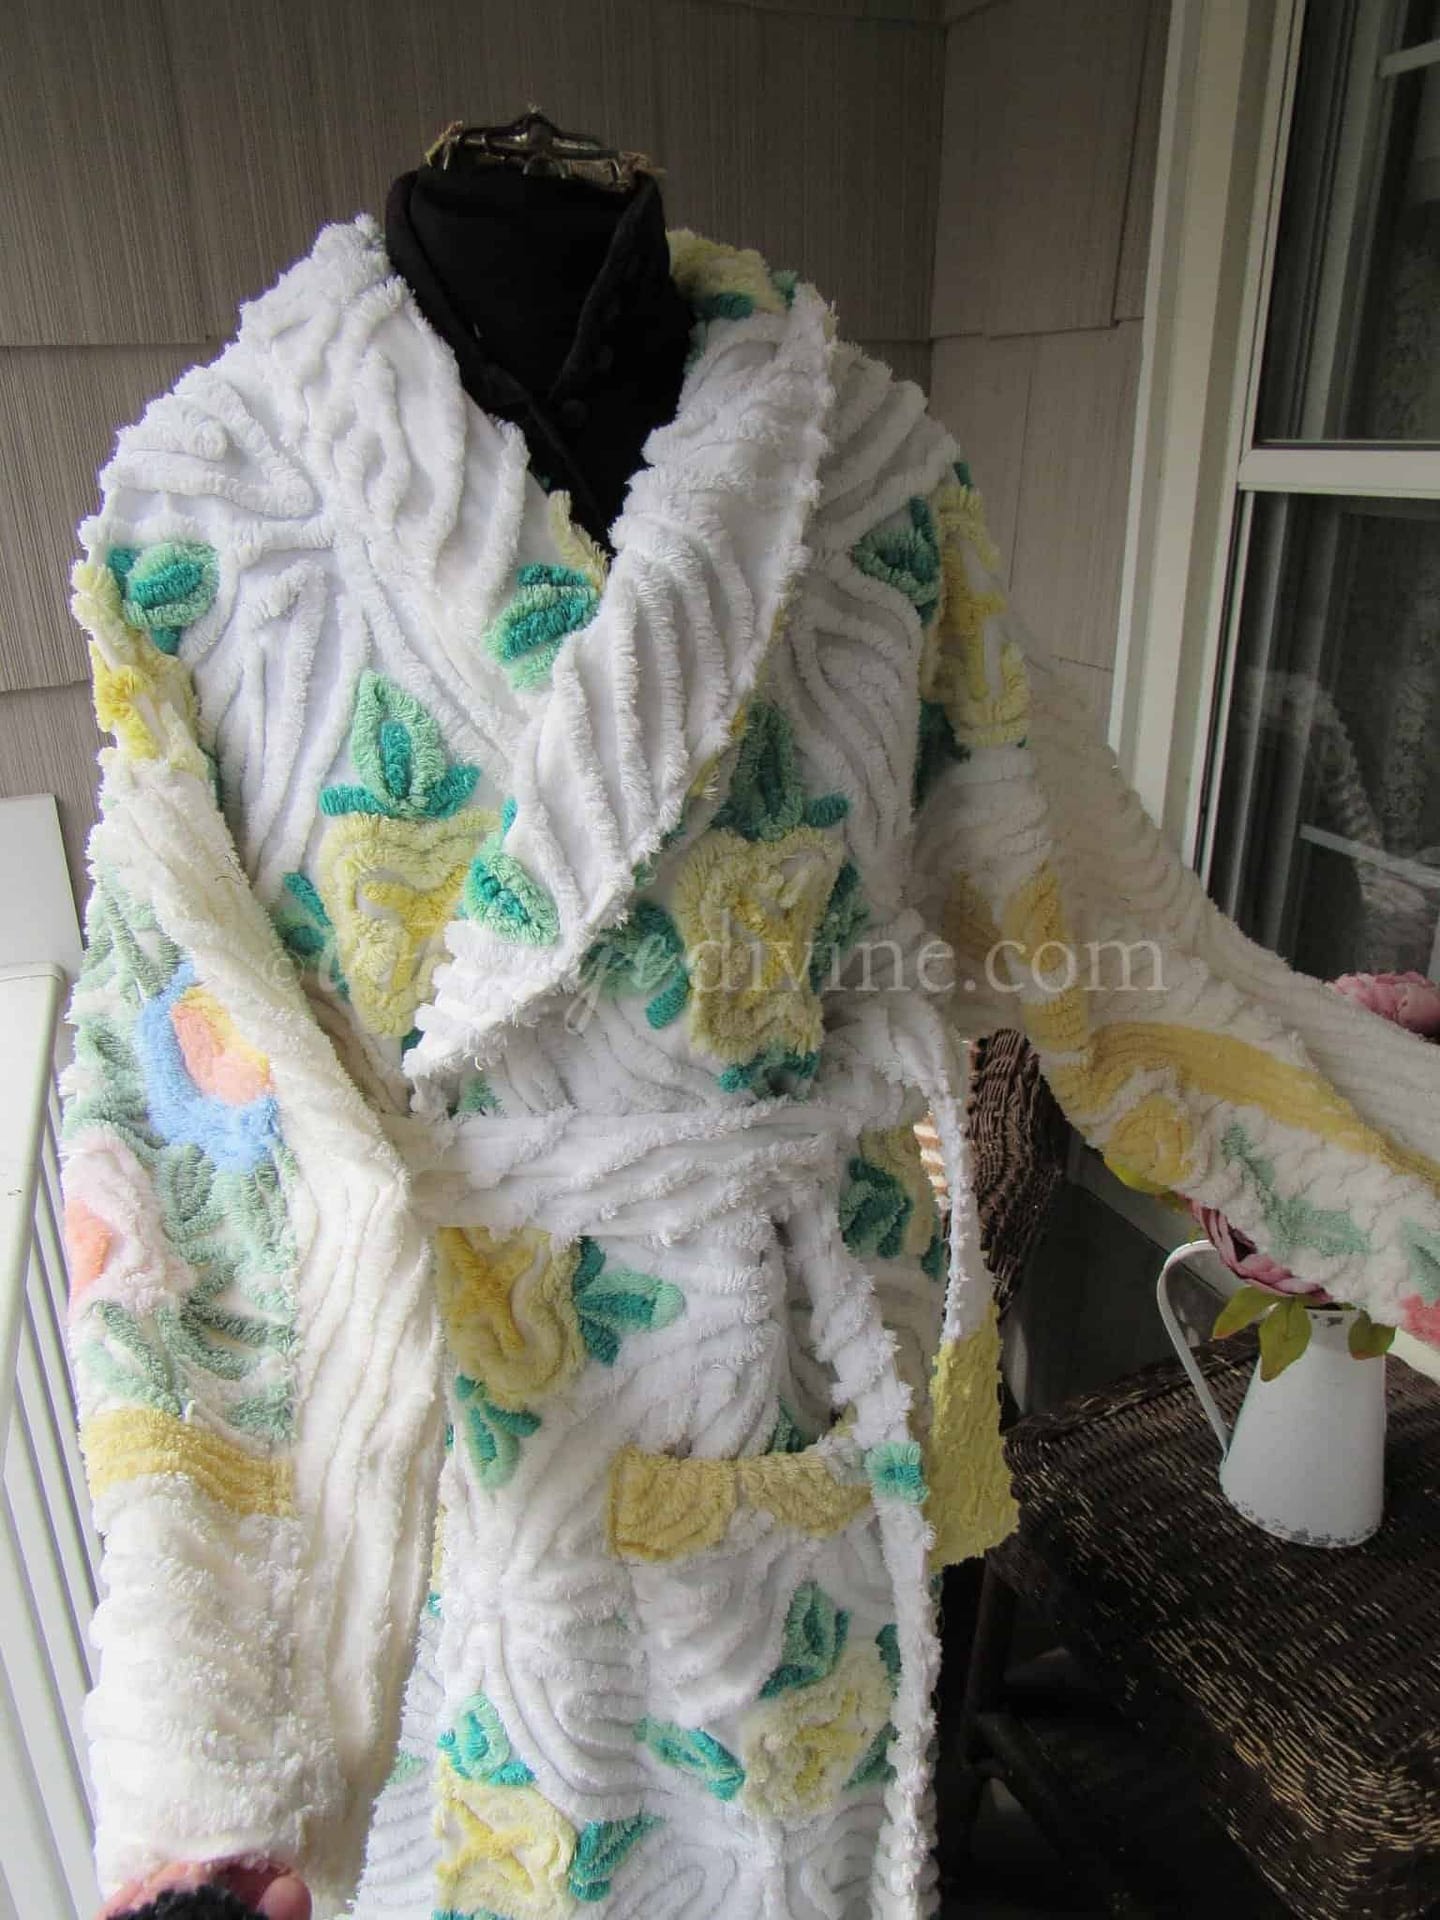 Bed of Roses Vintage Chenille Robe, Upcycled Bathrobe from Yellow Rose Bloom Bedspread, Plus Size 1x